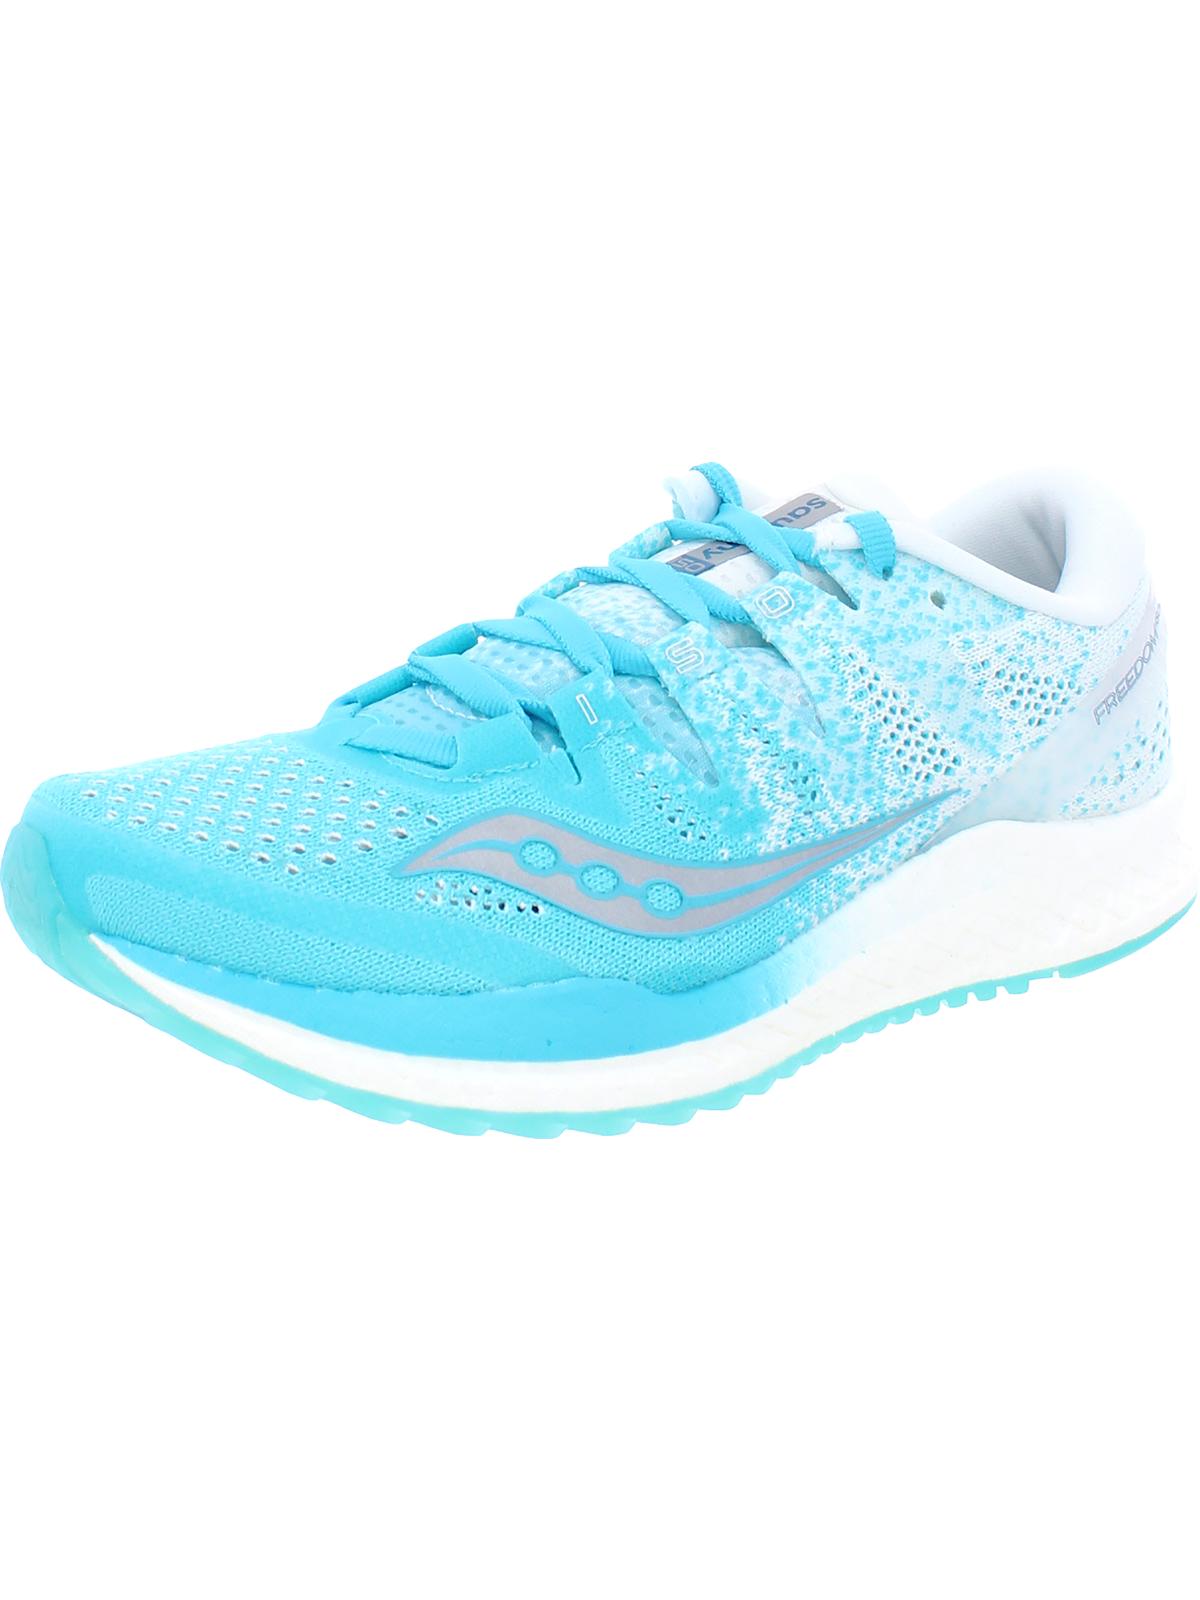 saucony freedom iso south africa